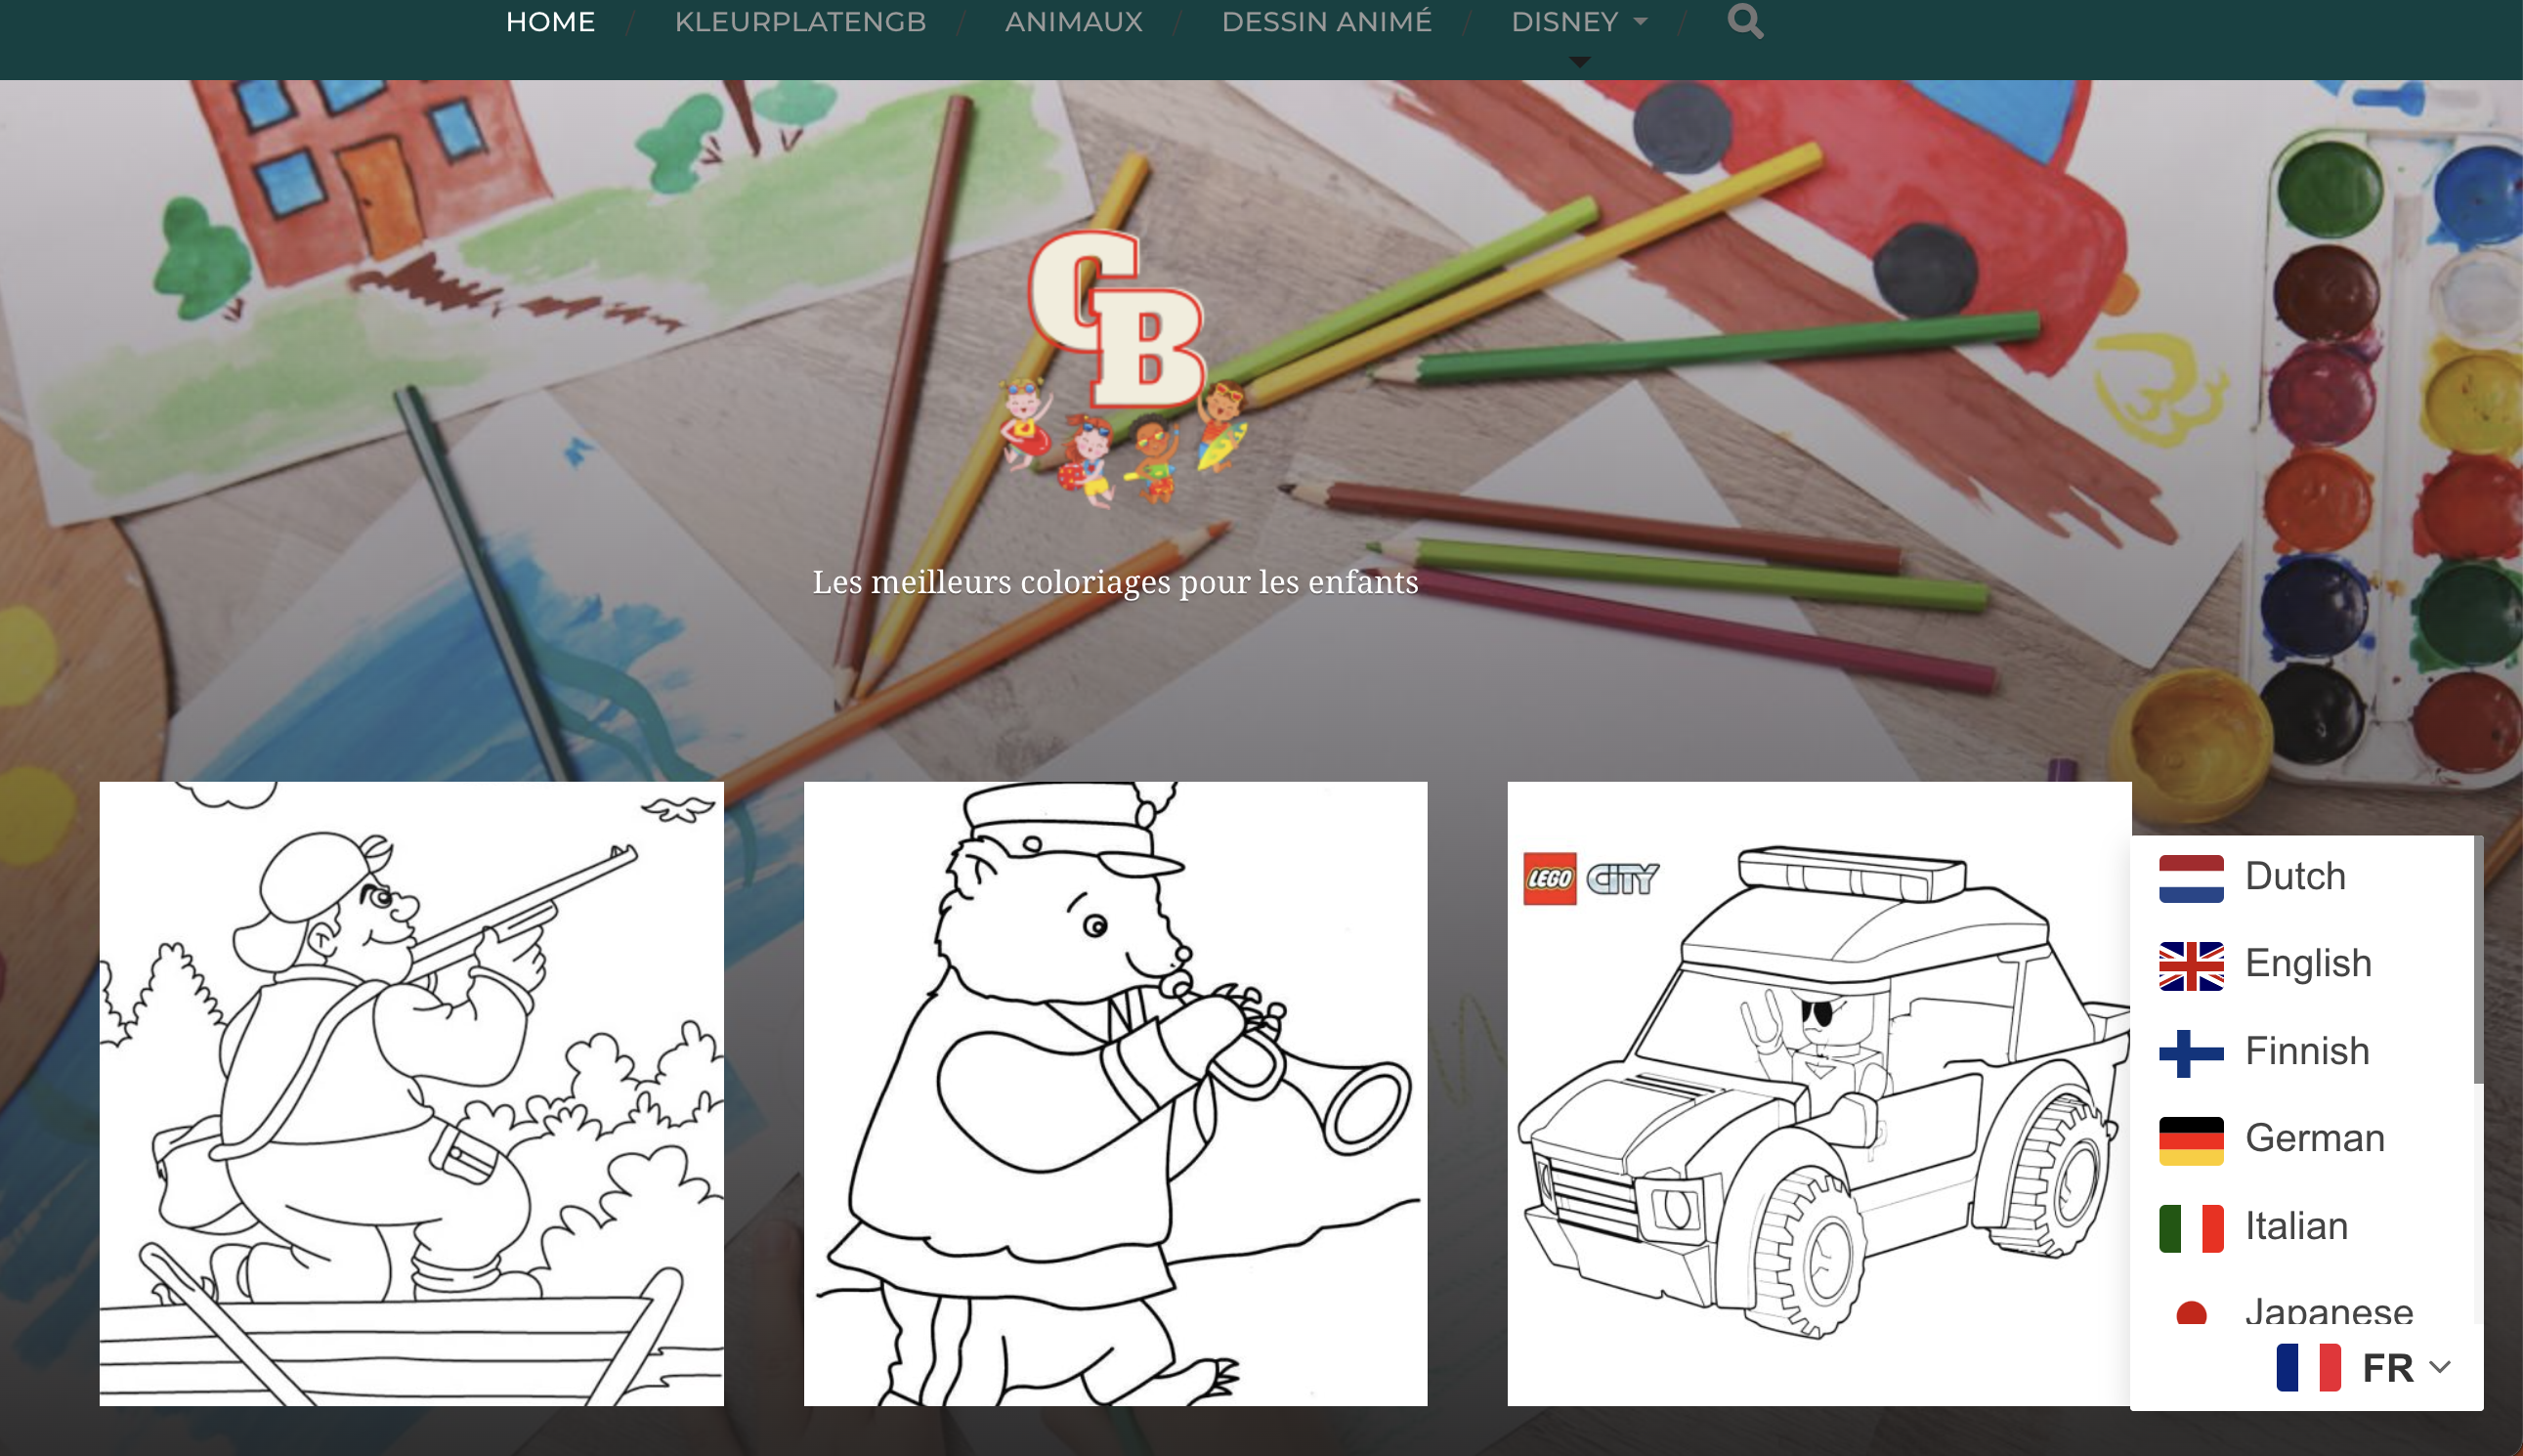 GBcoloriage.com Expands Its Reach with Multilingual Support